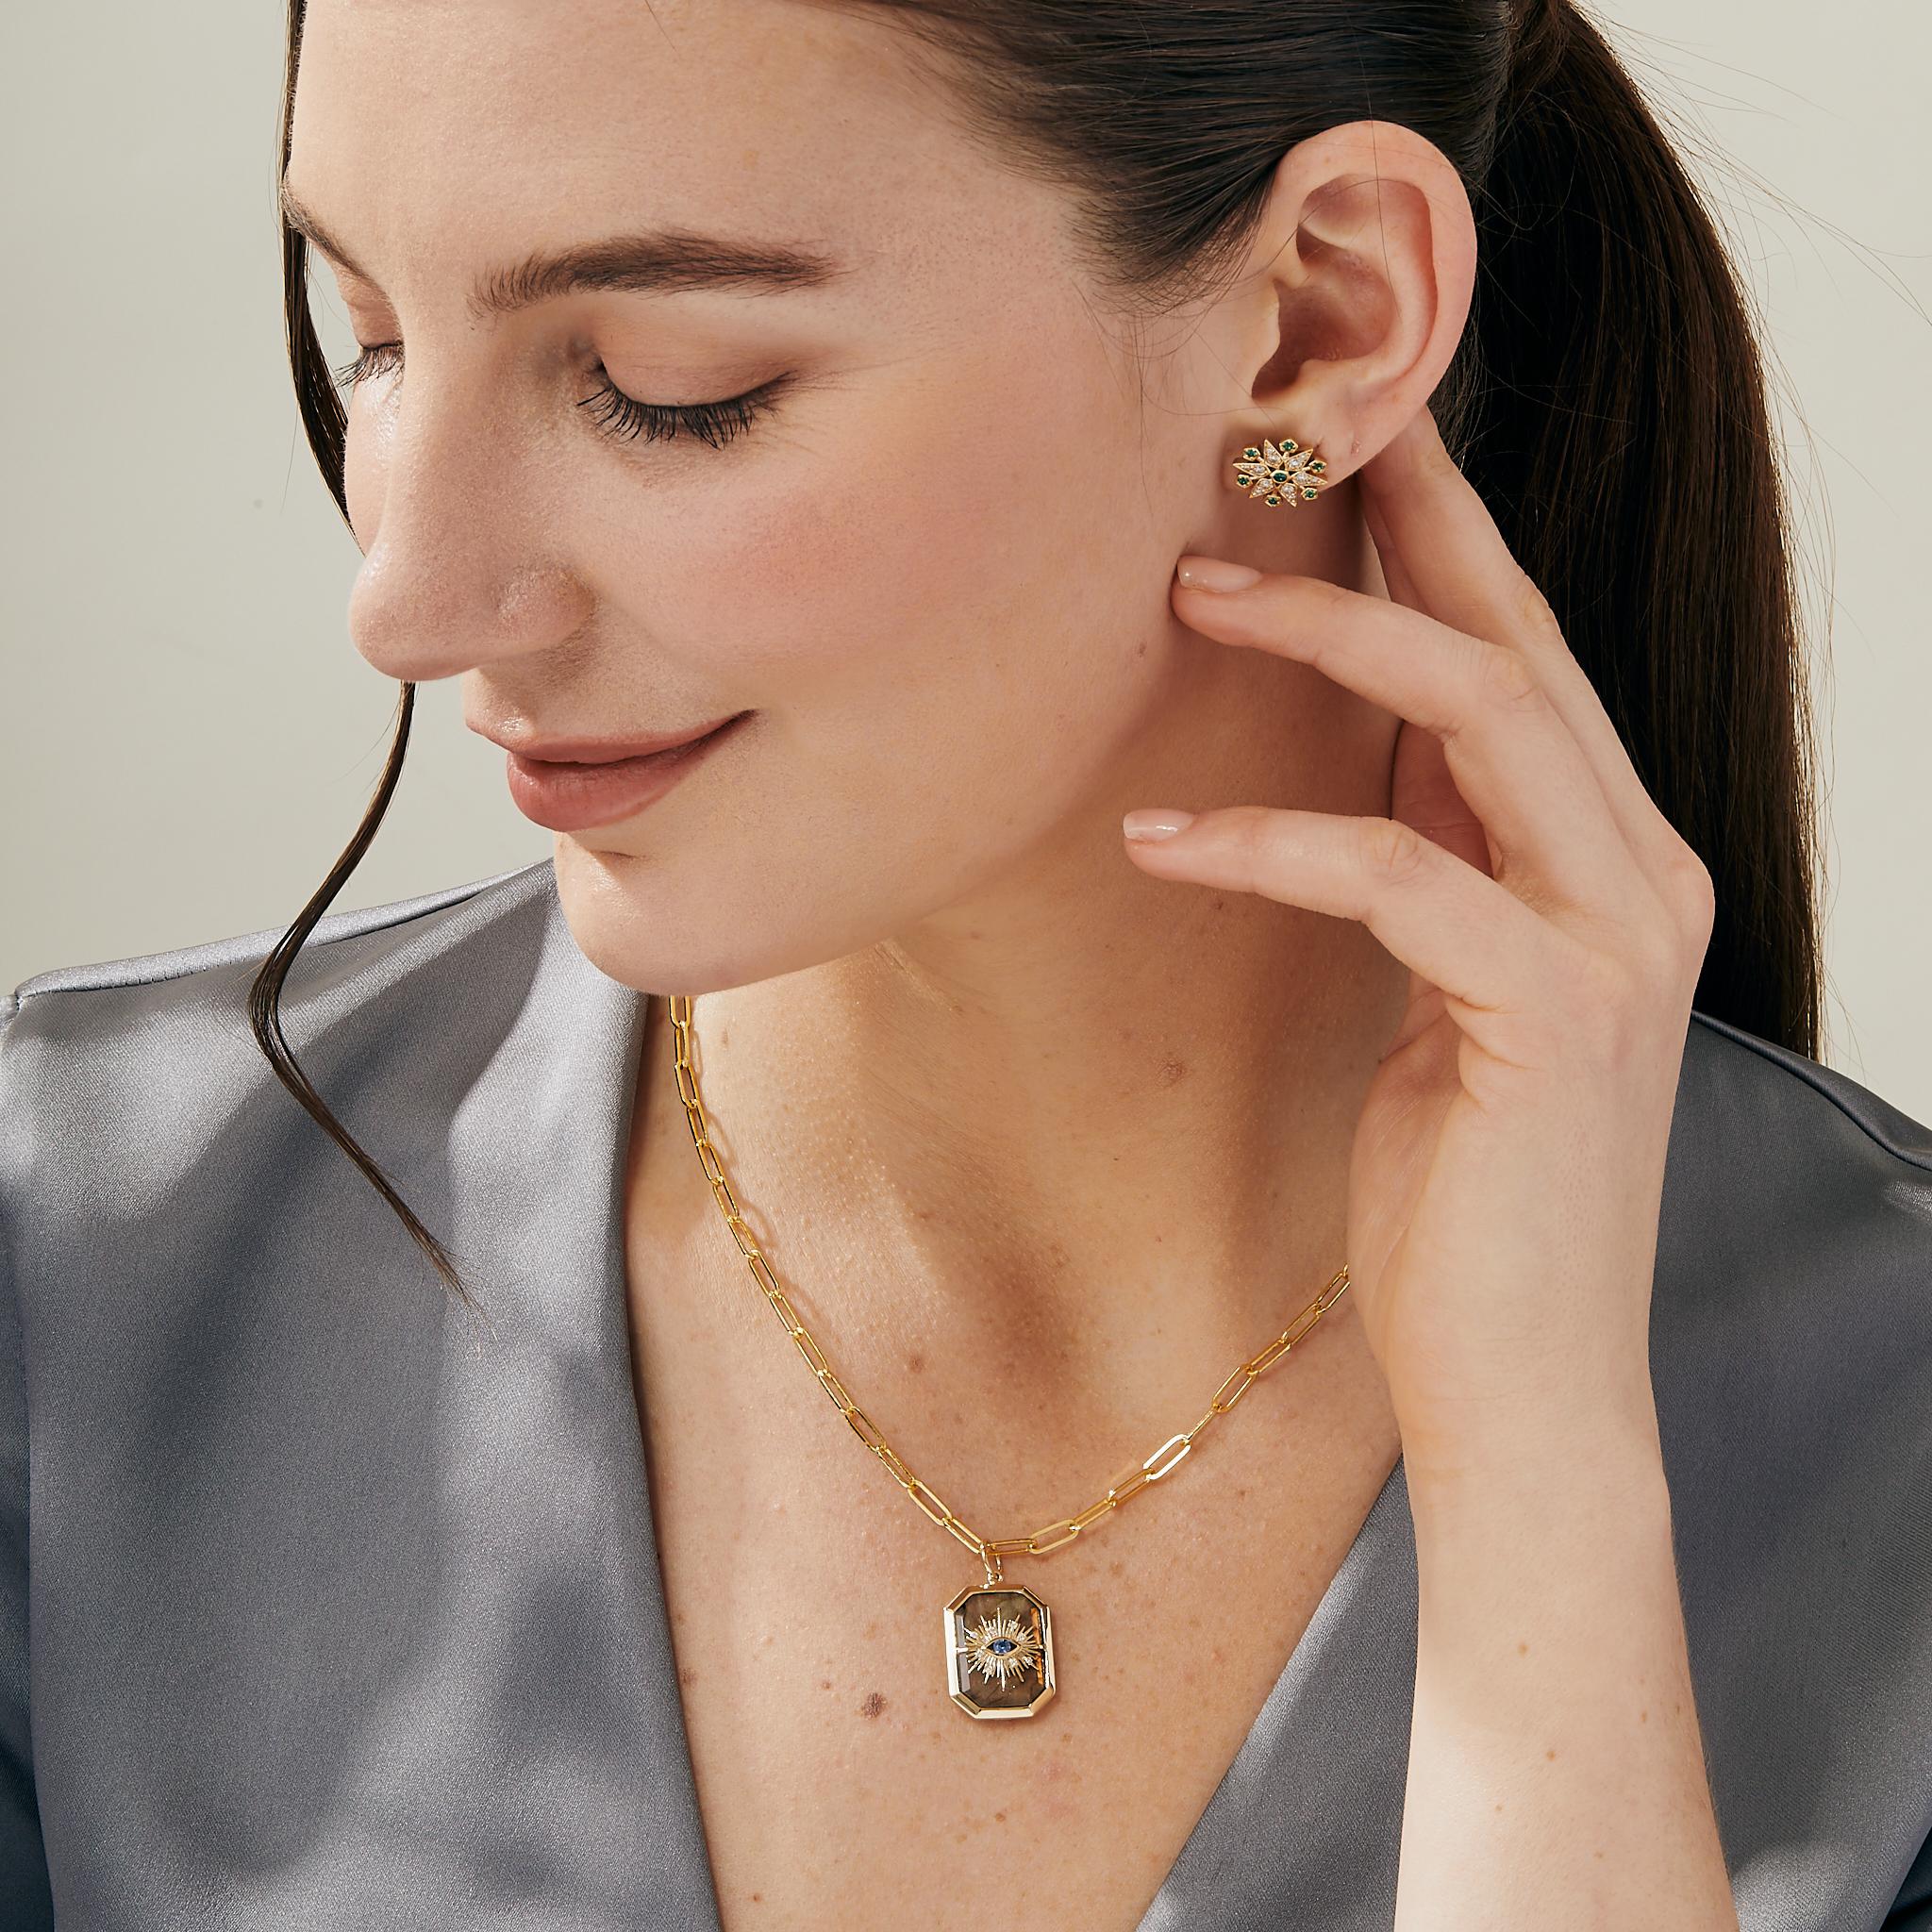 Created in 18 karat yellow gold
Labradorite 12.50 carats approx.
Blue sapphire 0.10 carat approx.
Diamonds 0.03 carat approx.
Chain sold separately
Limited Edition

Crafted from 18 karat yellow gold, this luxurious limited-edition pendant features